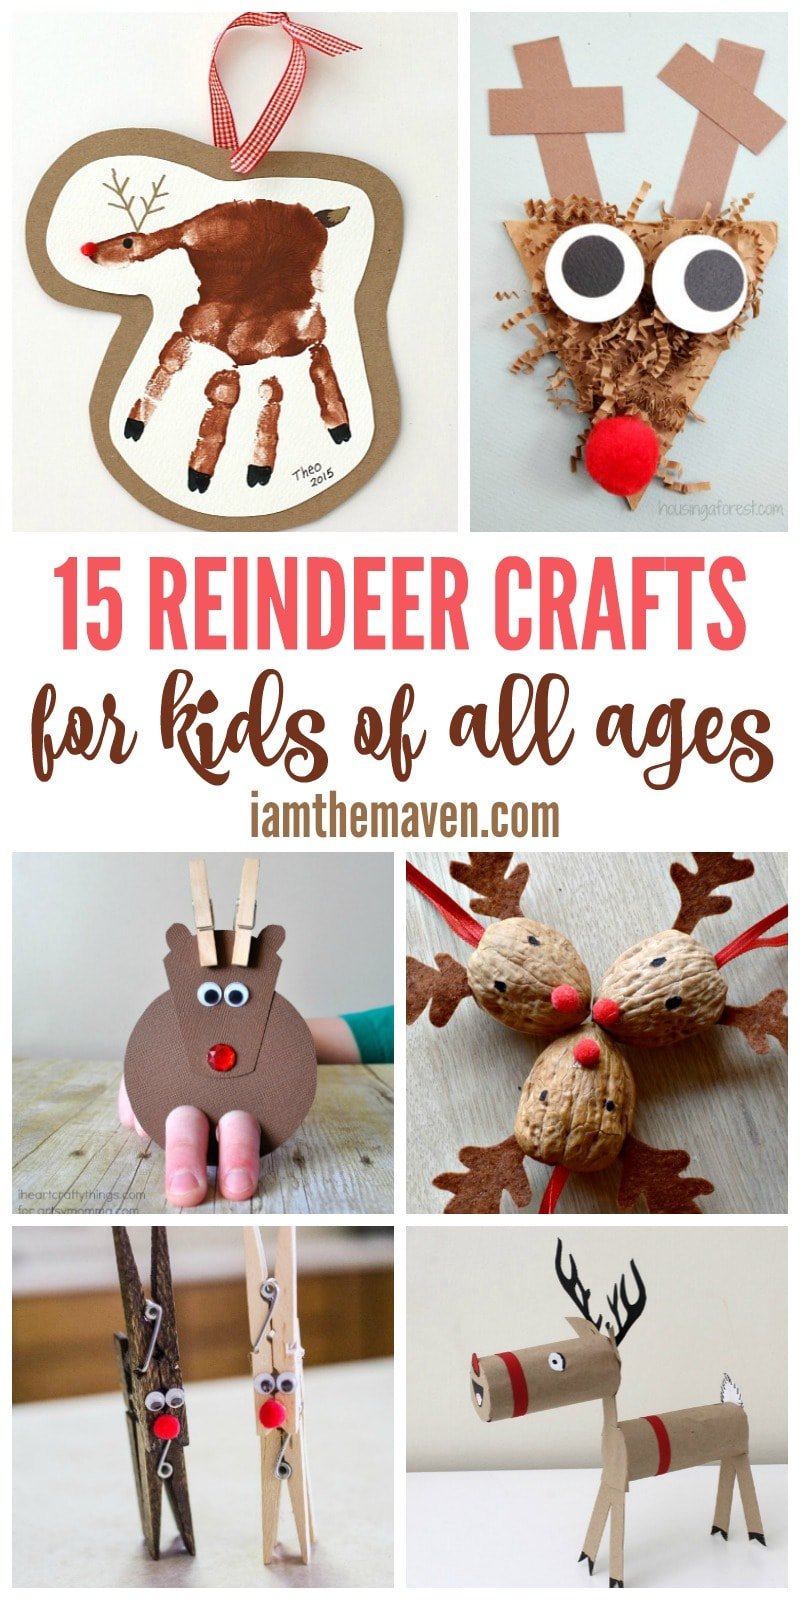 Here are some fun reindeer crafts!